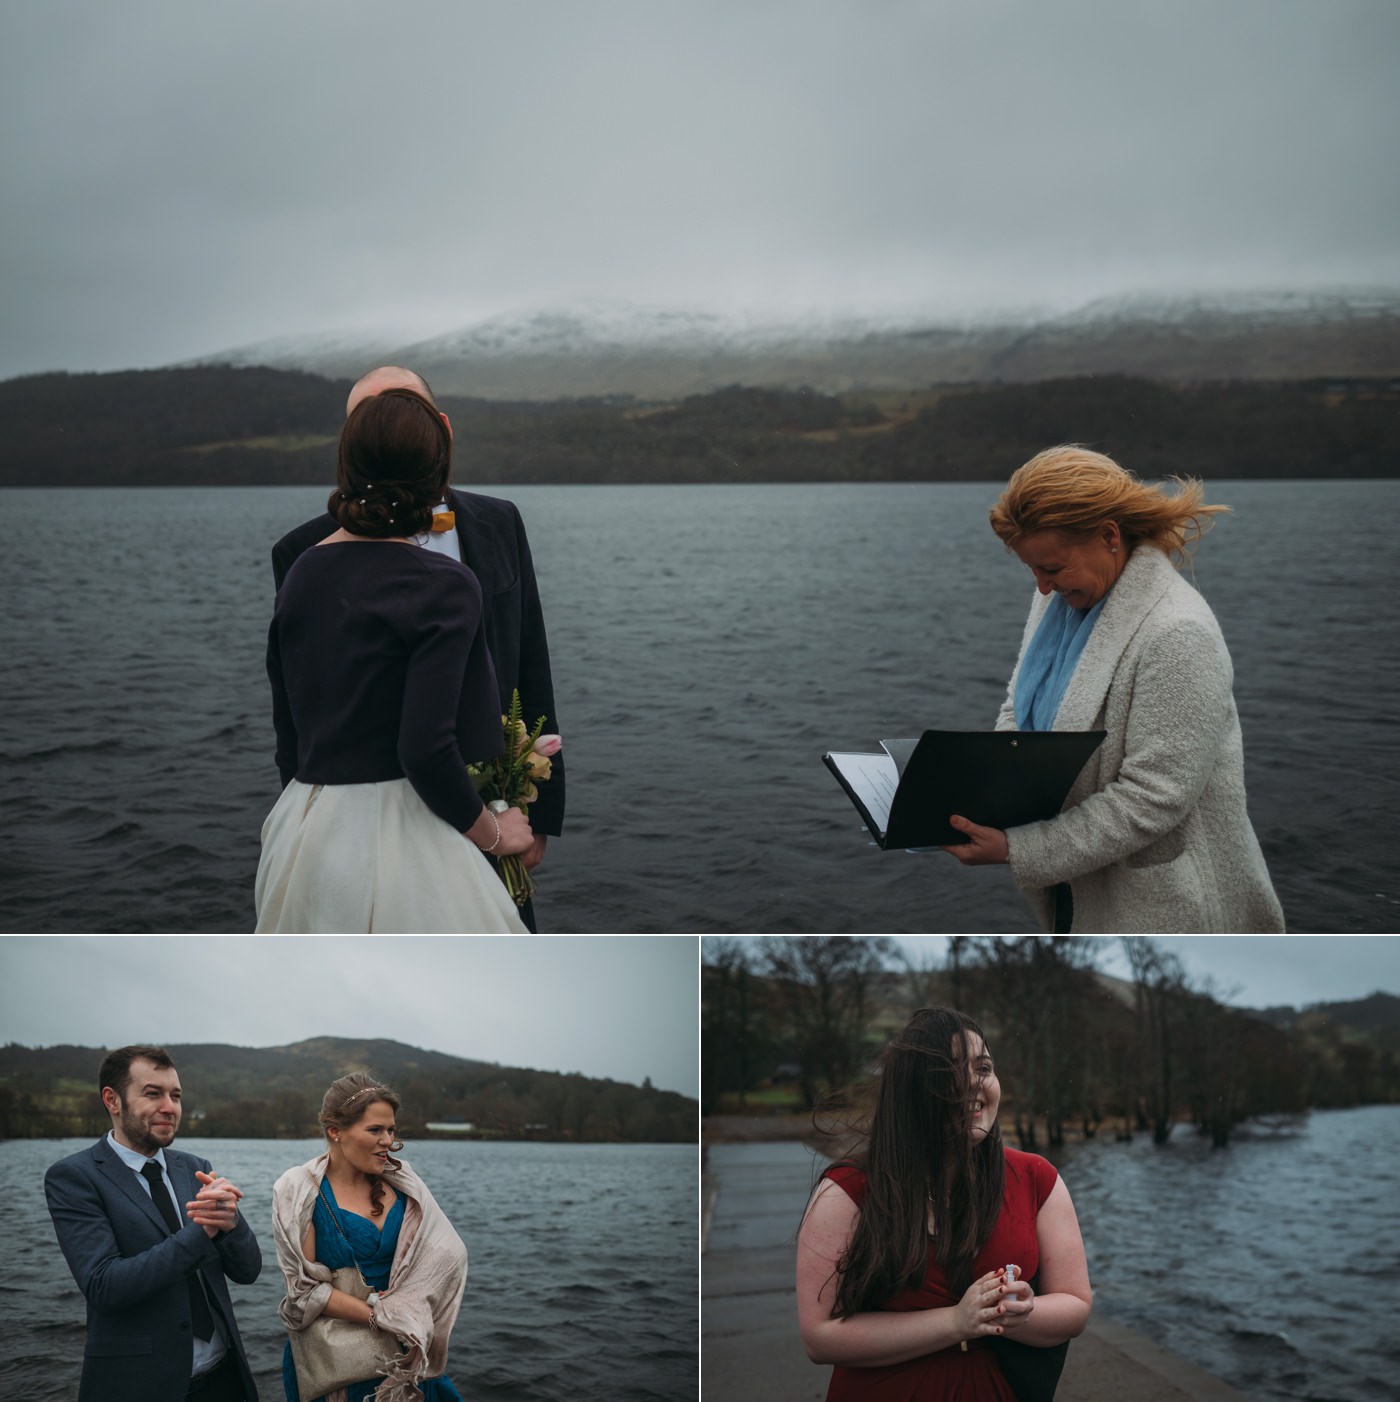 The quickest ceremony at scottish Ardenoaig is over, 4 minutes total!